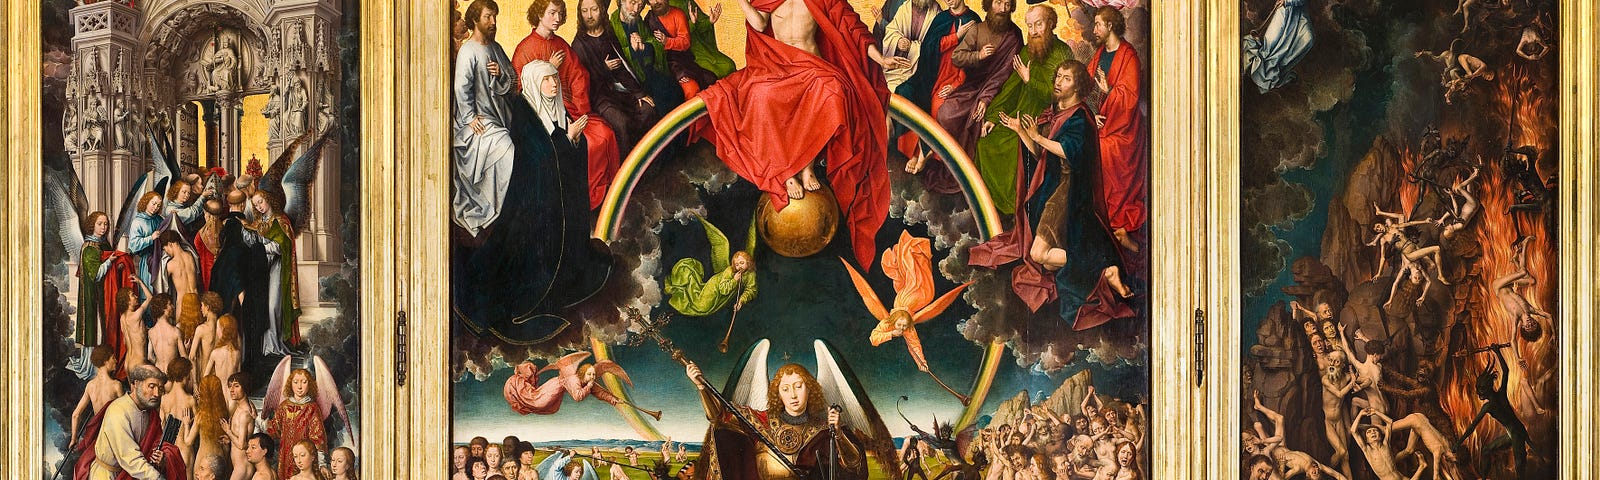 A triptych altarpiece of The Last Judgment by Hans Memling